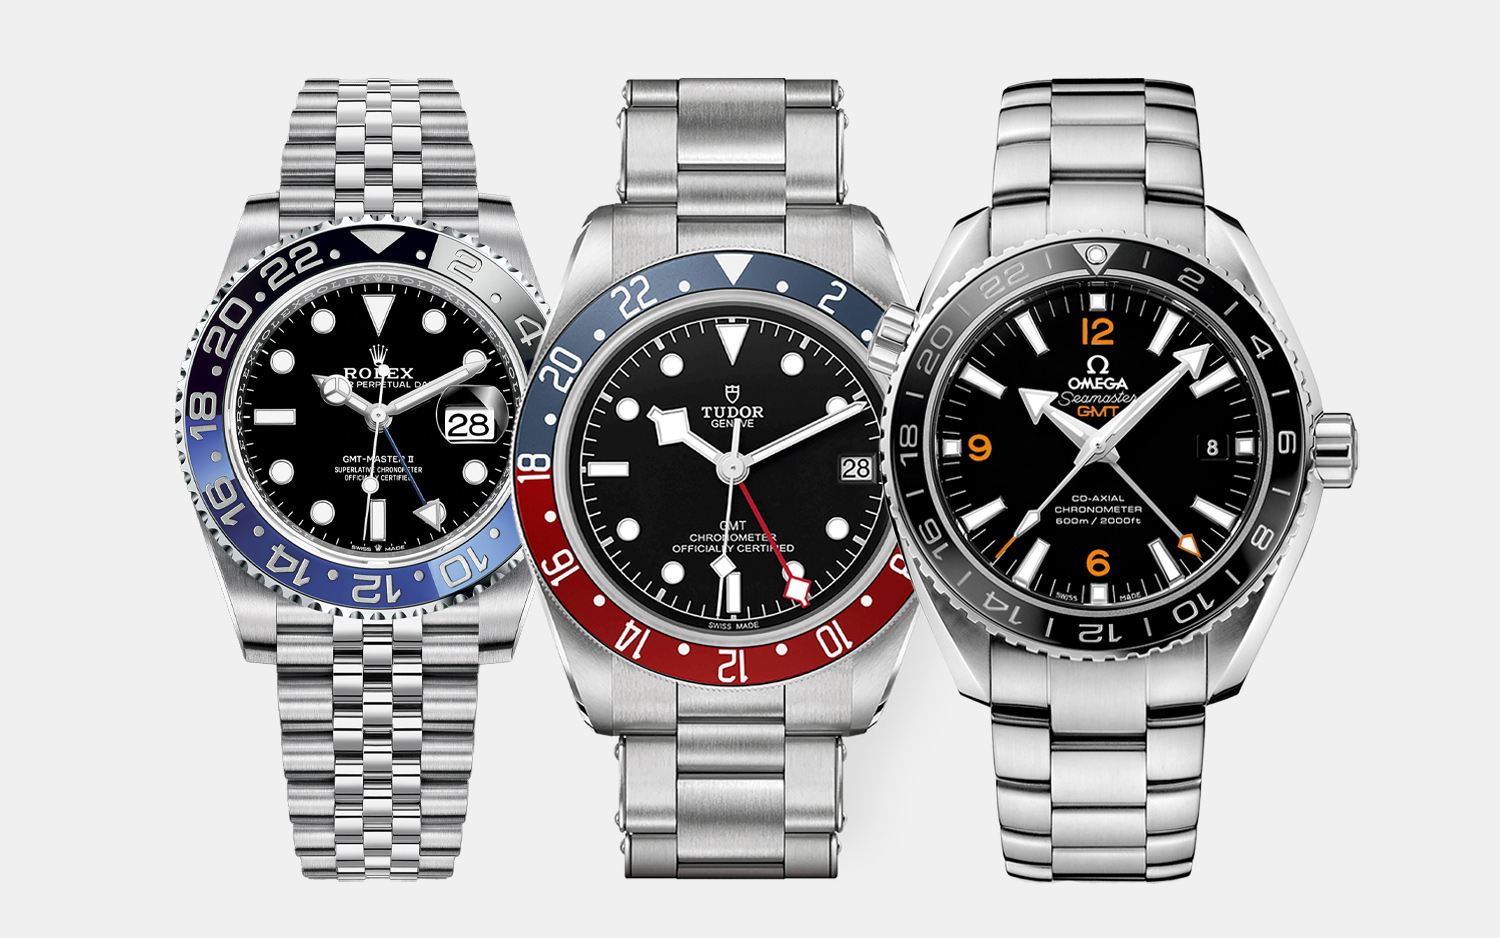 Horology 101: How to Use a GMT Watch